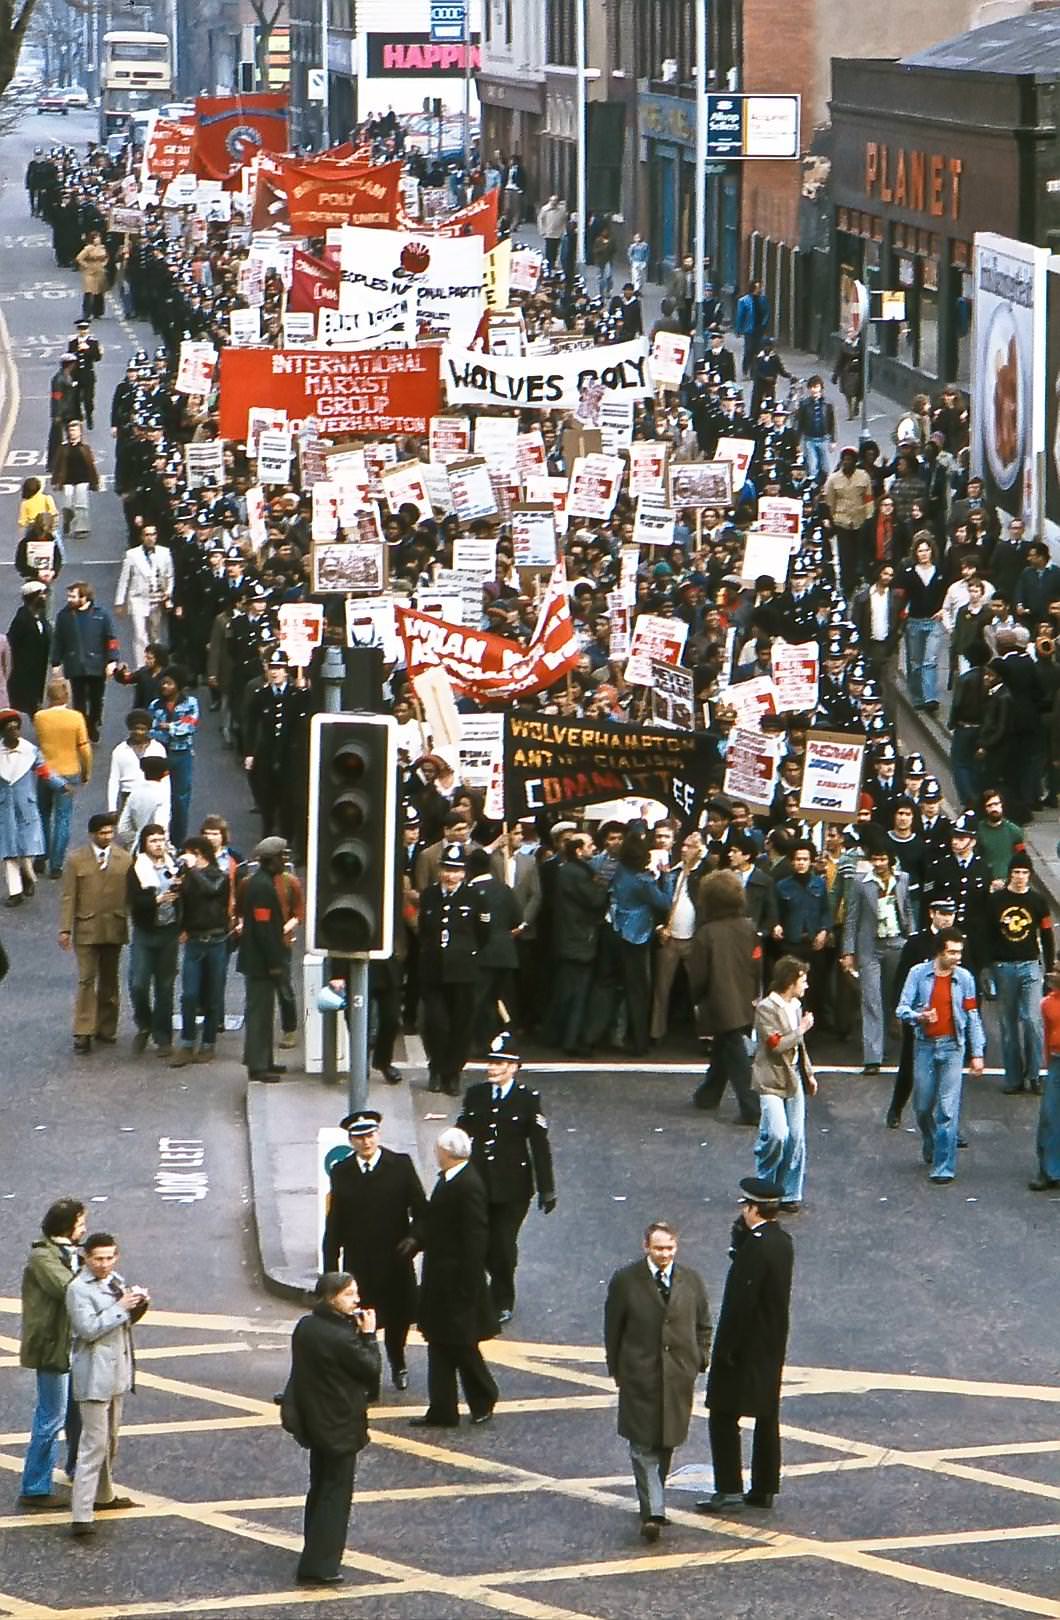 Anti-racist demonstrators assemble in Cleveland Road, Wolverhampton, prior to marching through the town centre. 11th March 1978